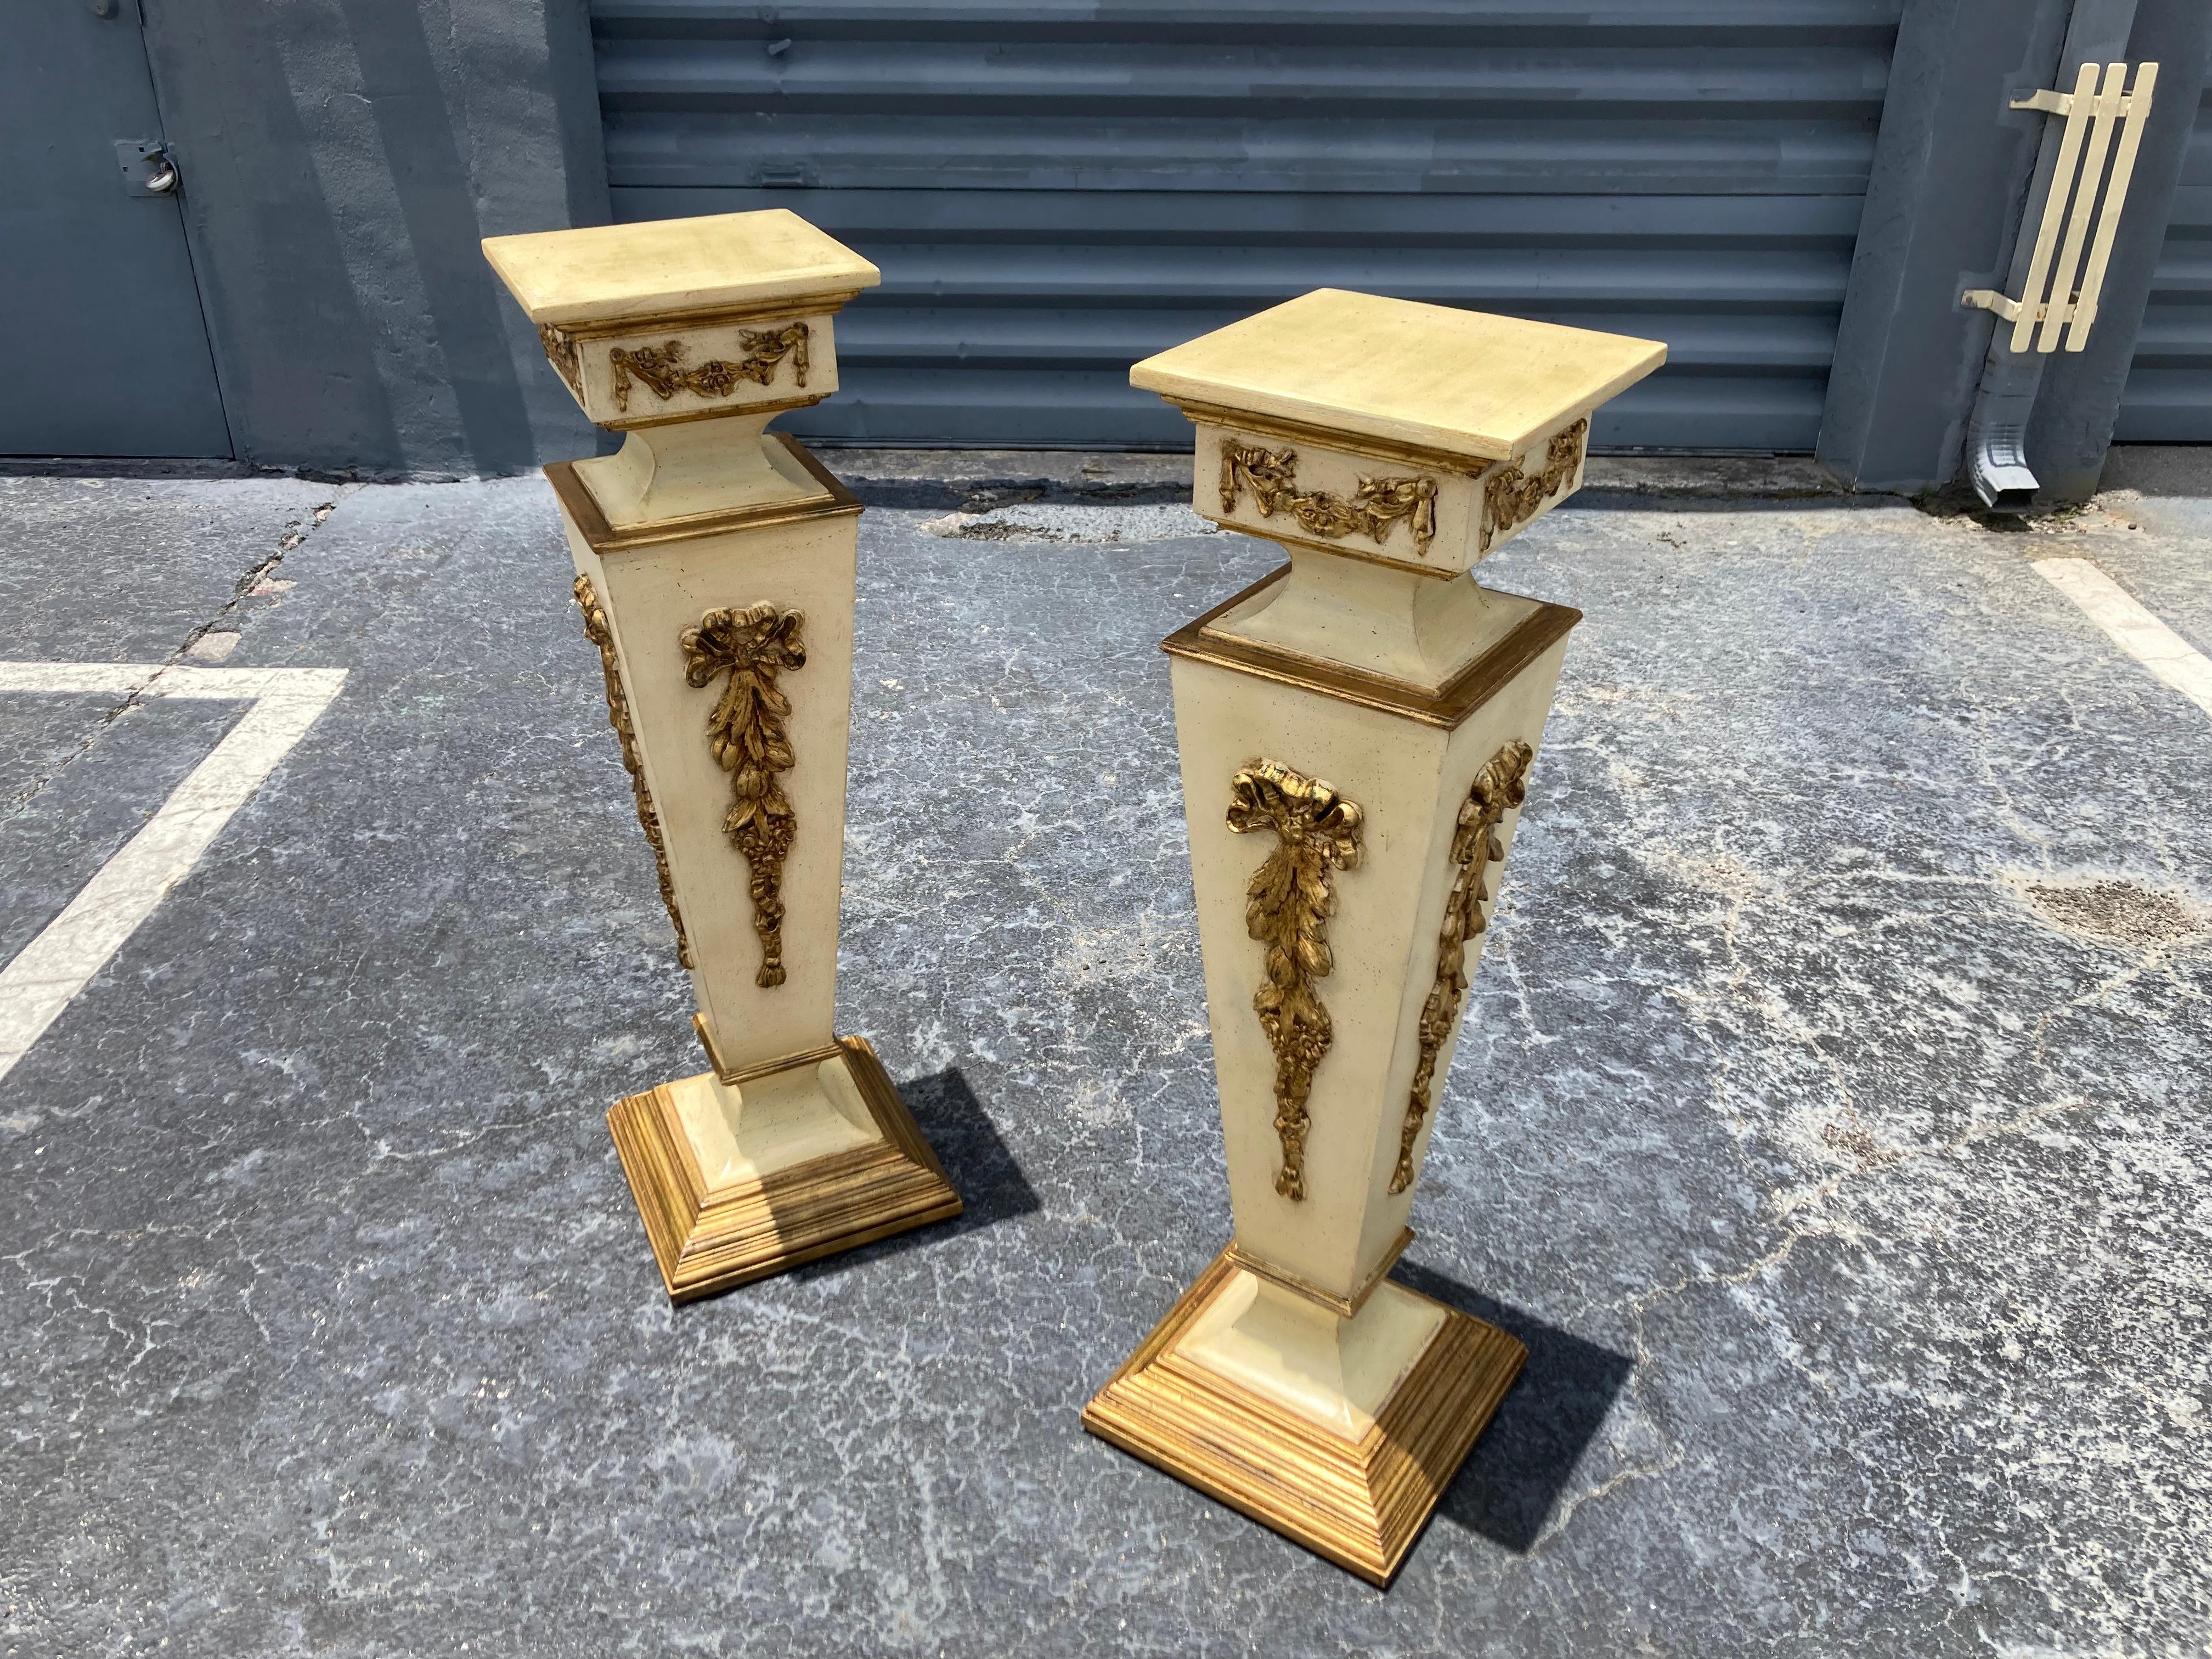 Pair of Italian Pedestals made in the 1950s. Ready for a new home.